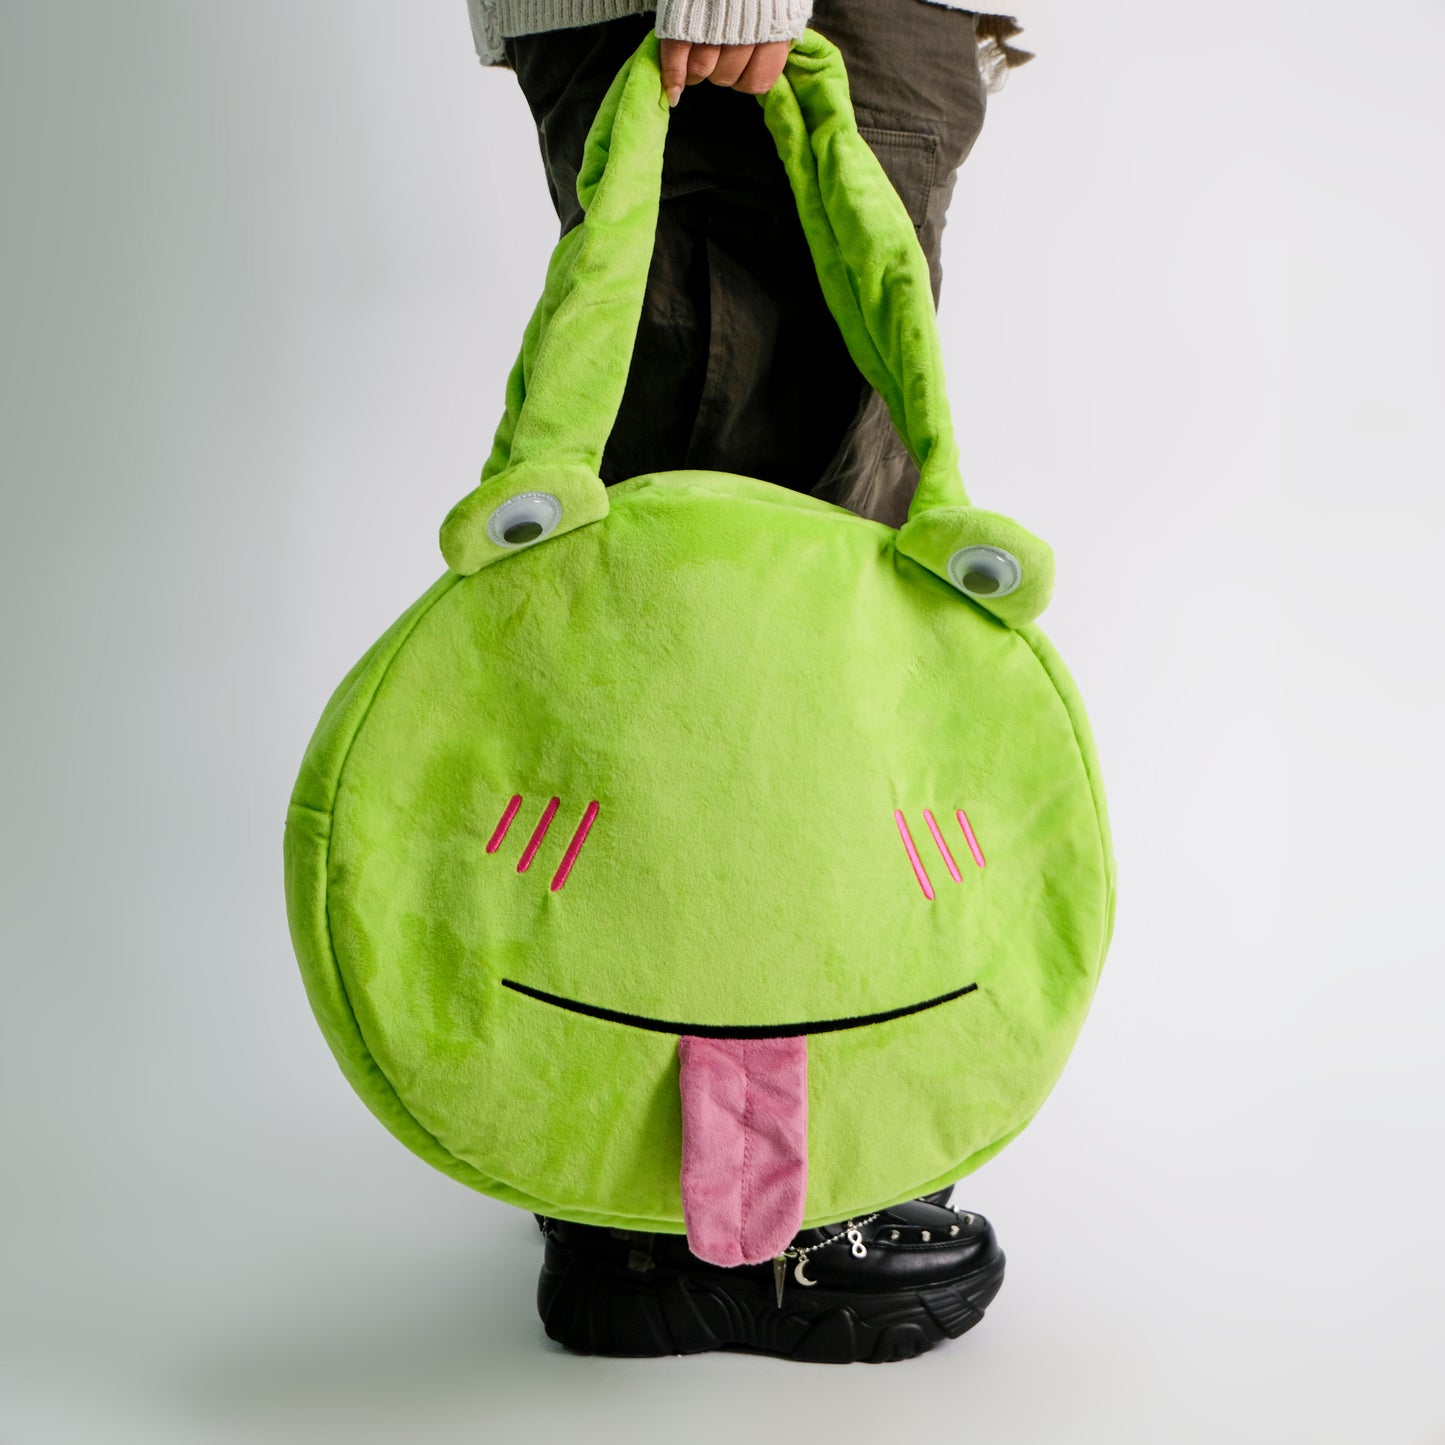 Bevvy the Frog Bag - Accessories - KOI Footwear - Green - Three-Quarter Back View